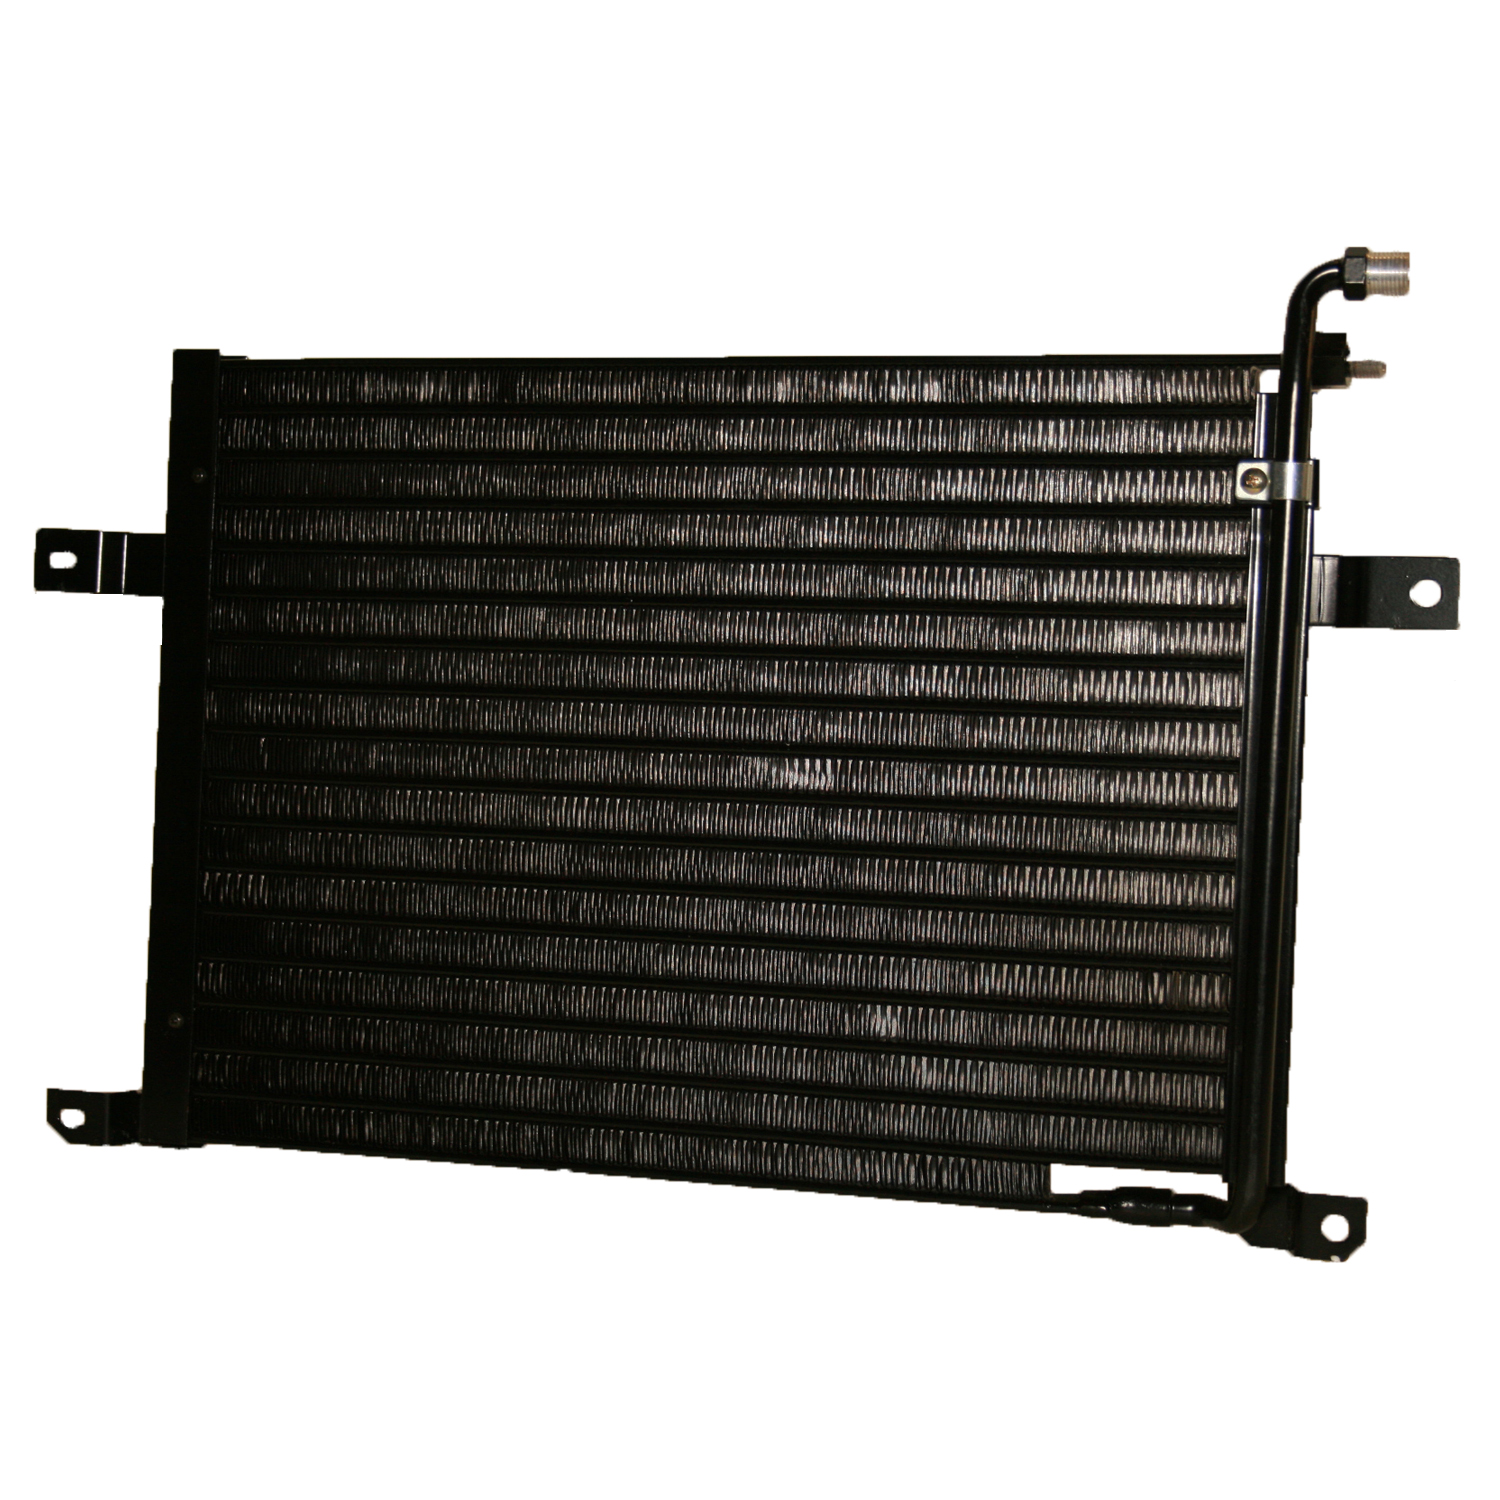 TCW Condenser 44-4171 New Product Image field_60b6a13a6e67c